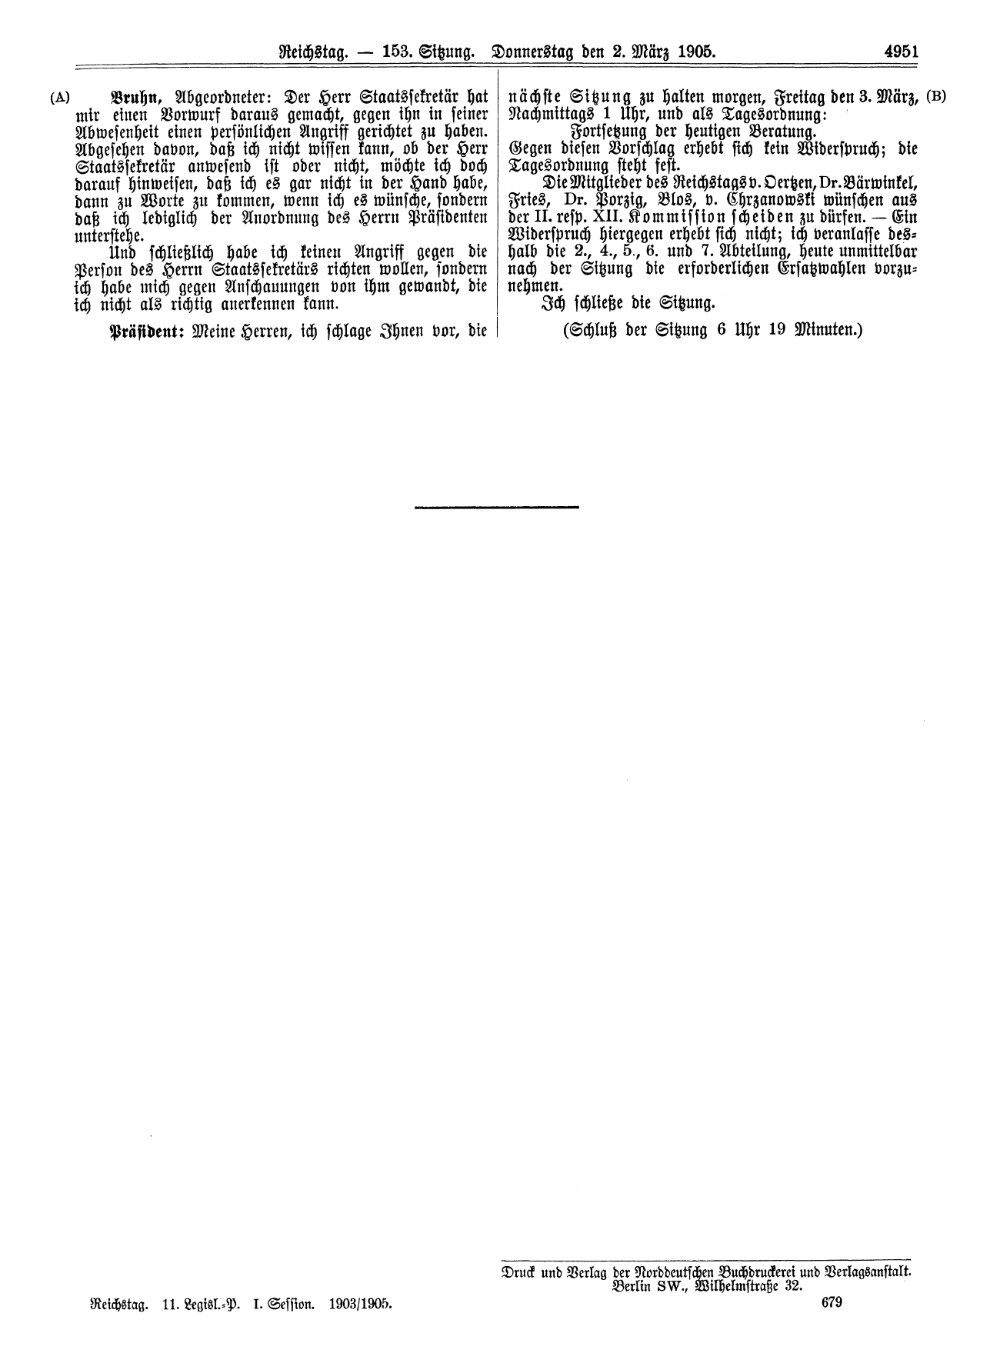 Scan of page 4951